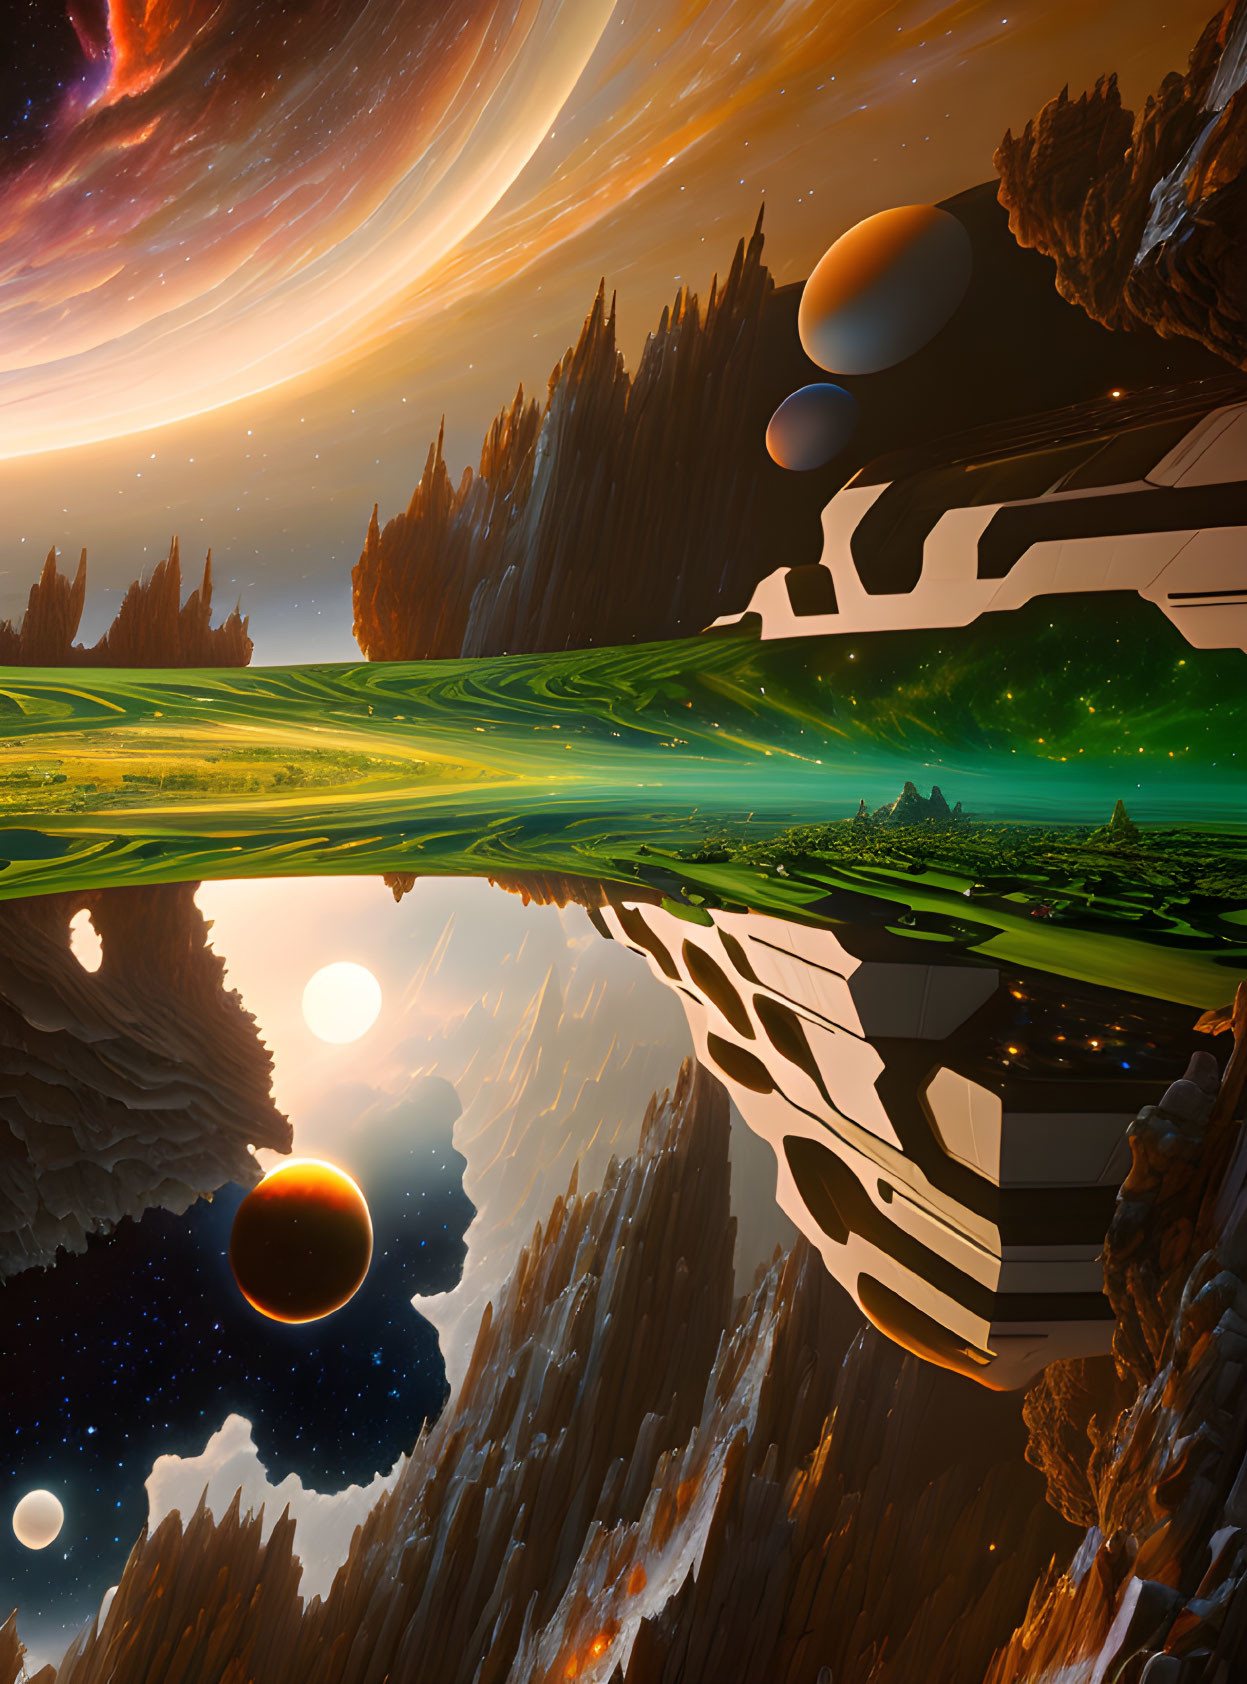 Surreal landscape with floating islands and celestial sky.